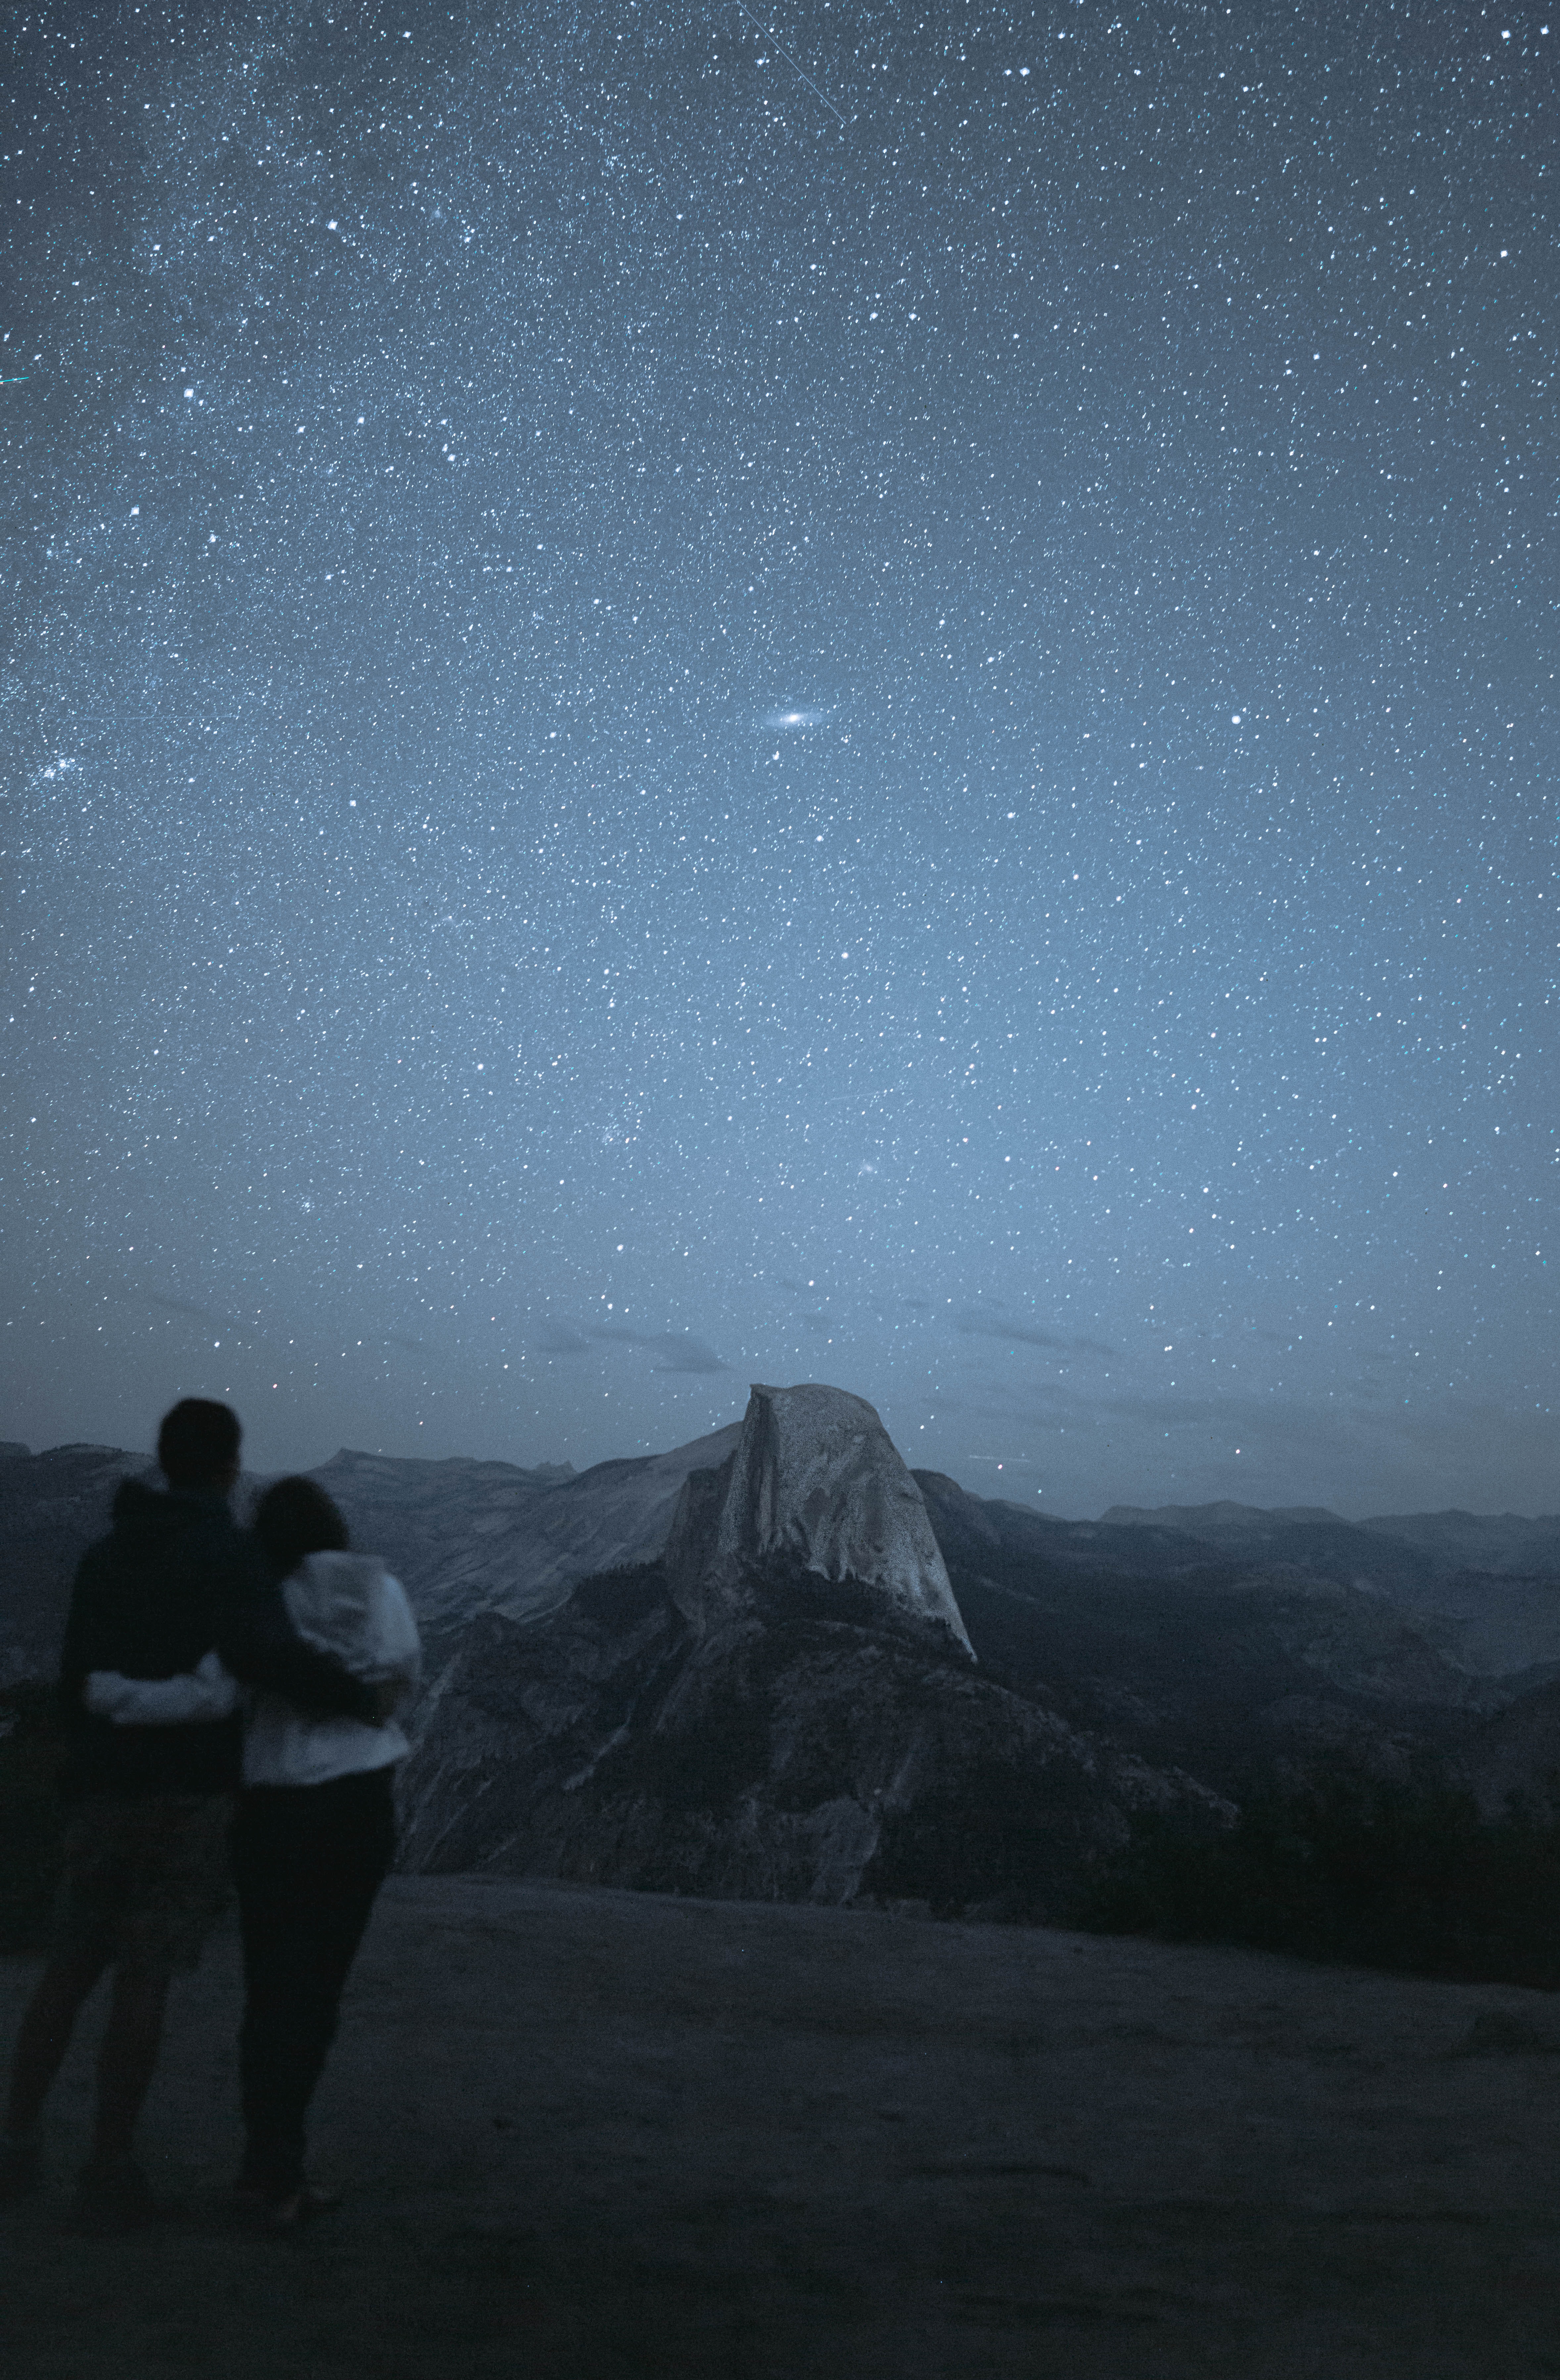 A couple gazing at the stars. | Source: Pexels